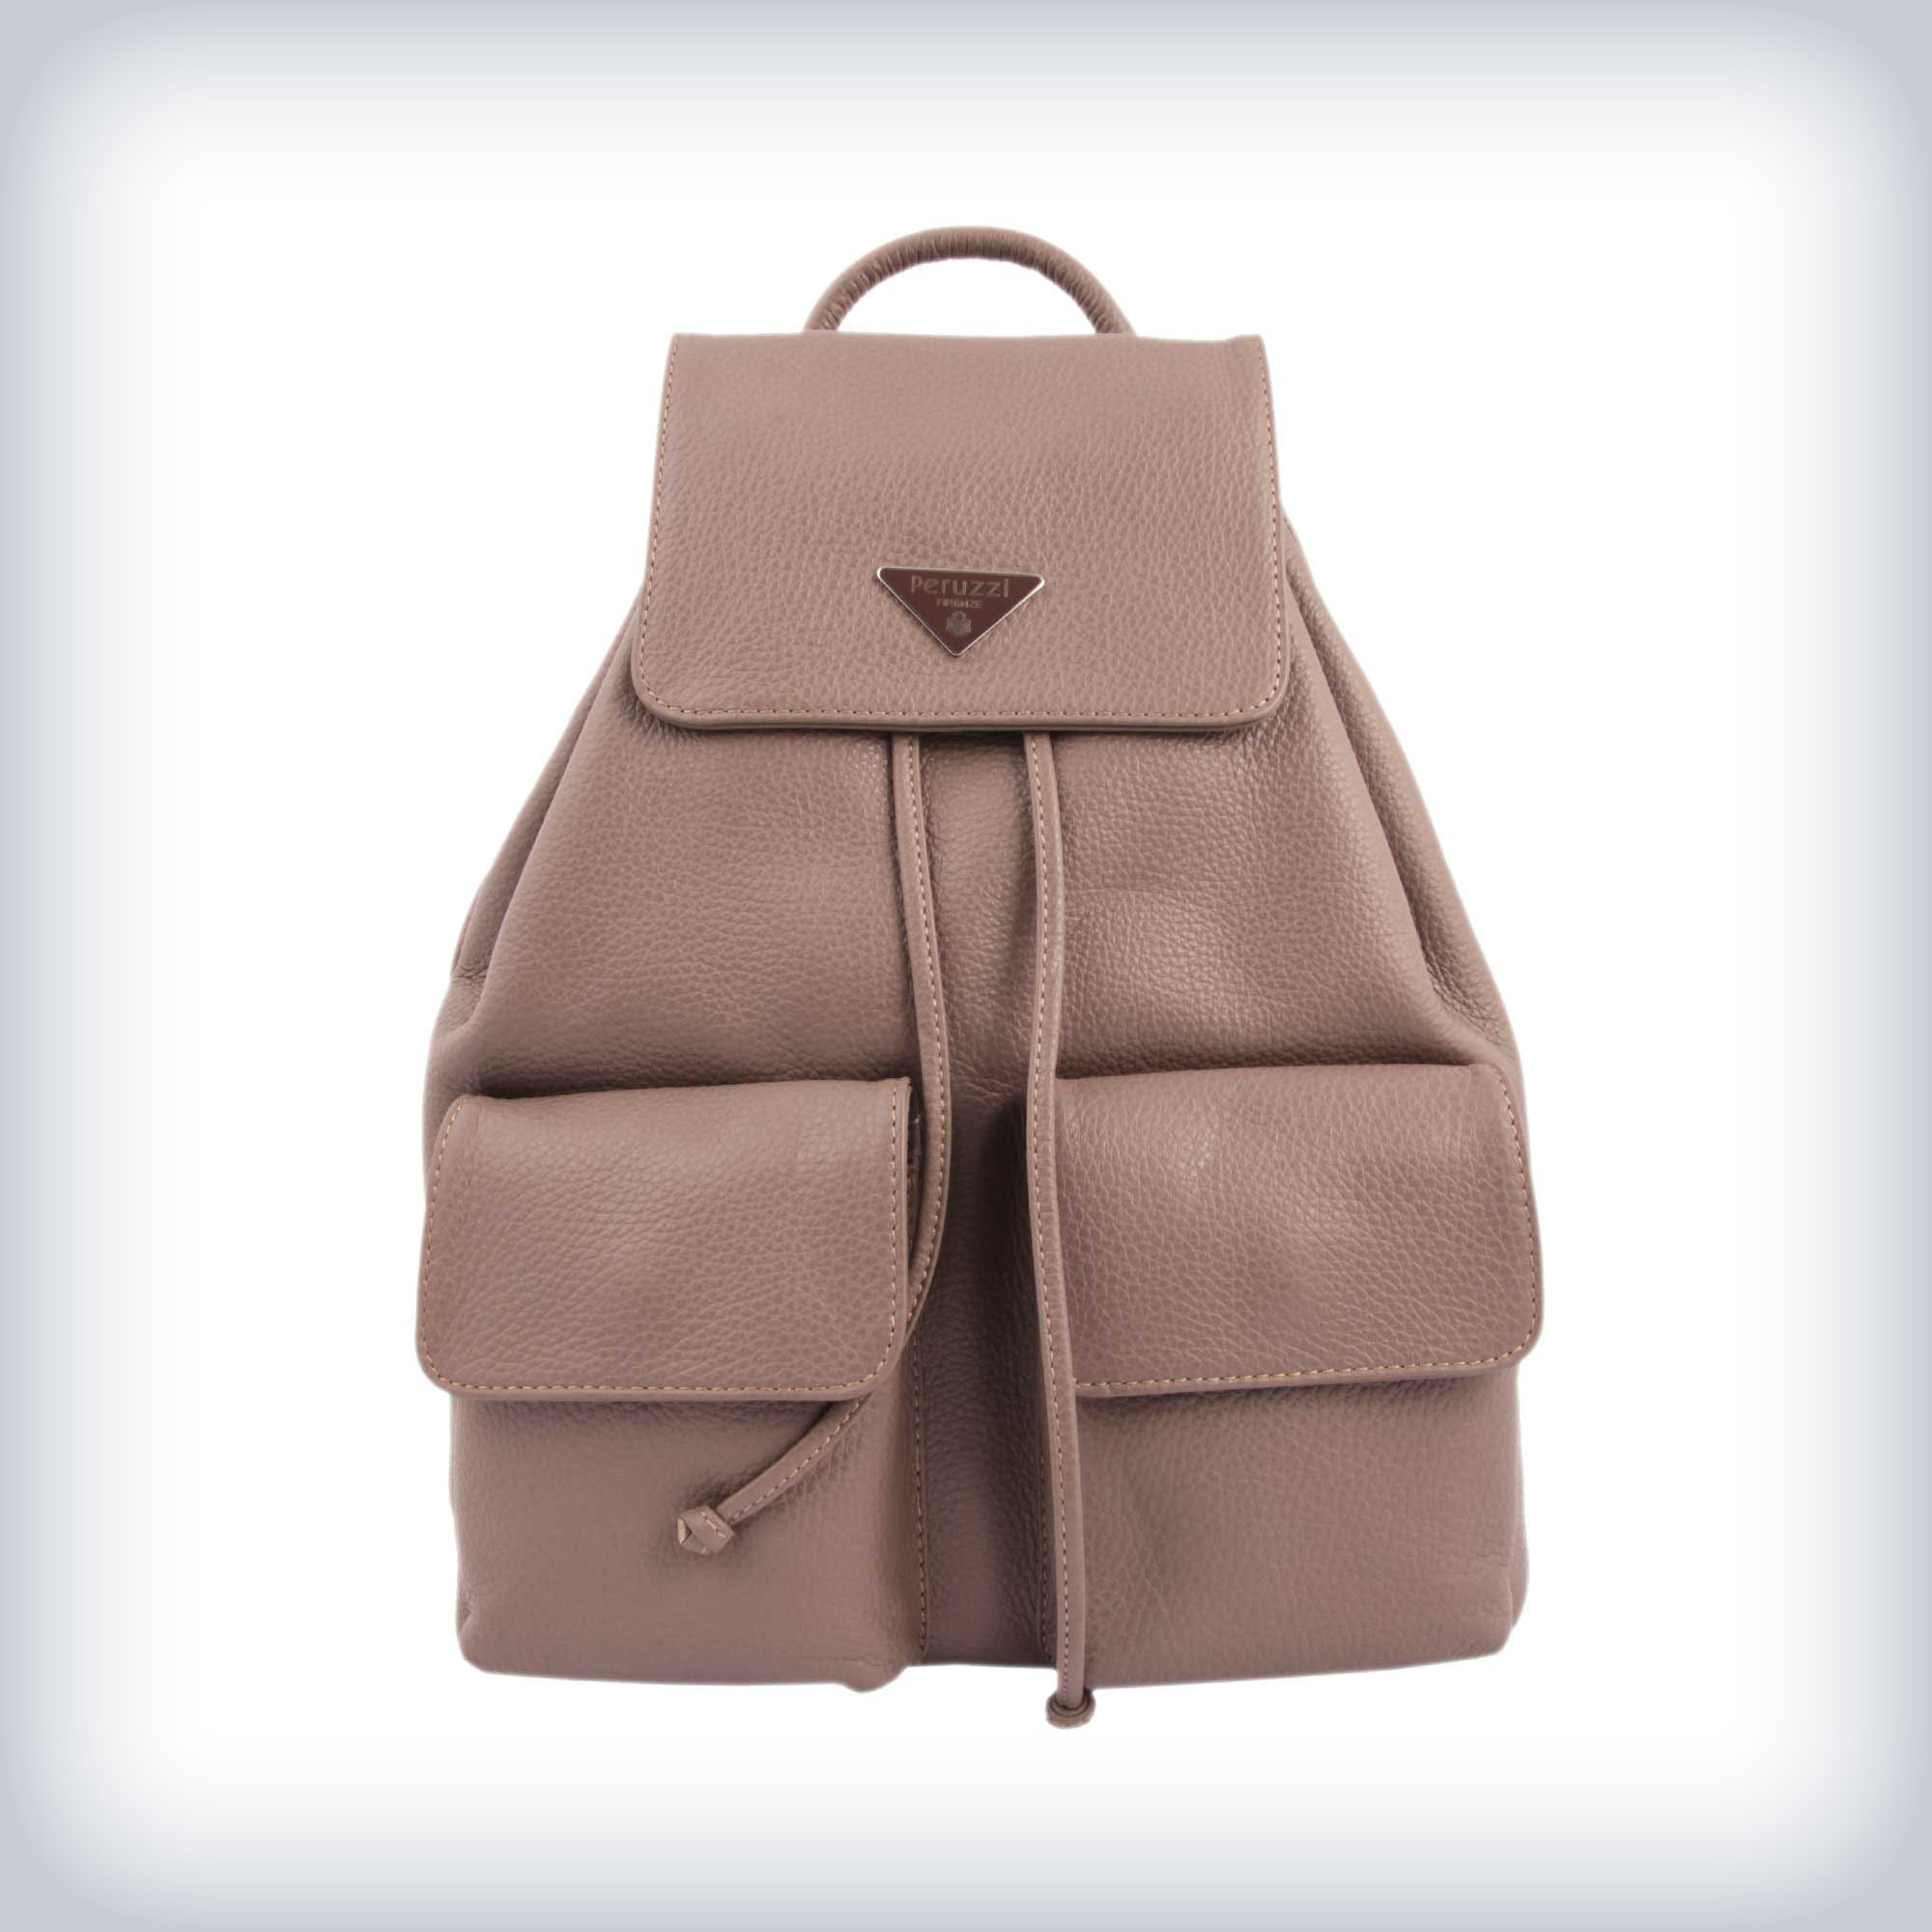 Soft leather backpack